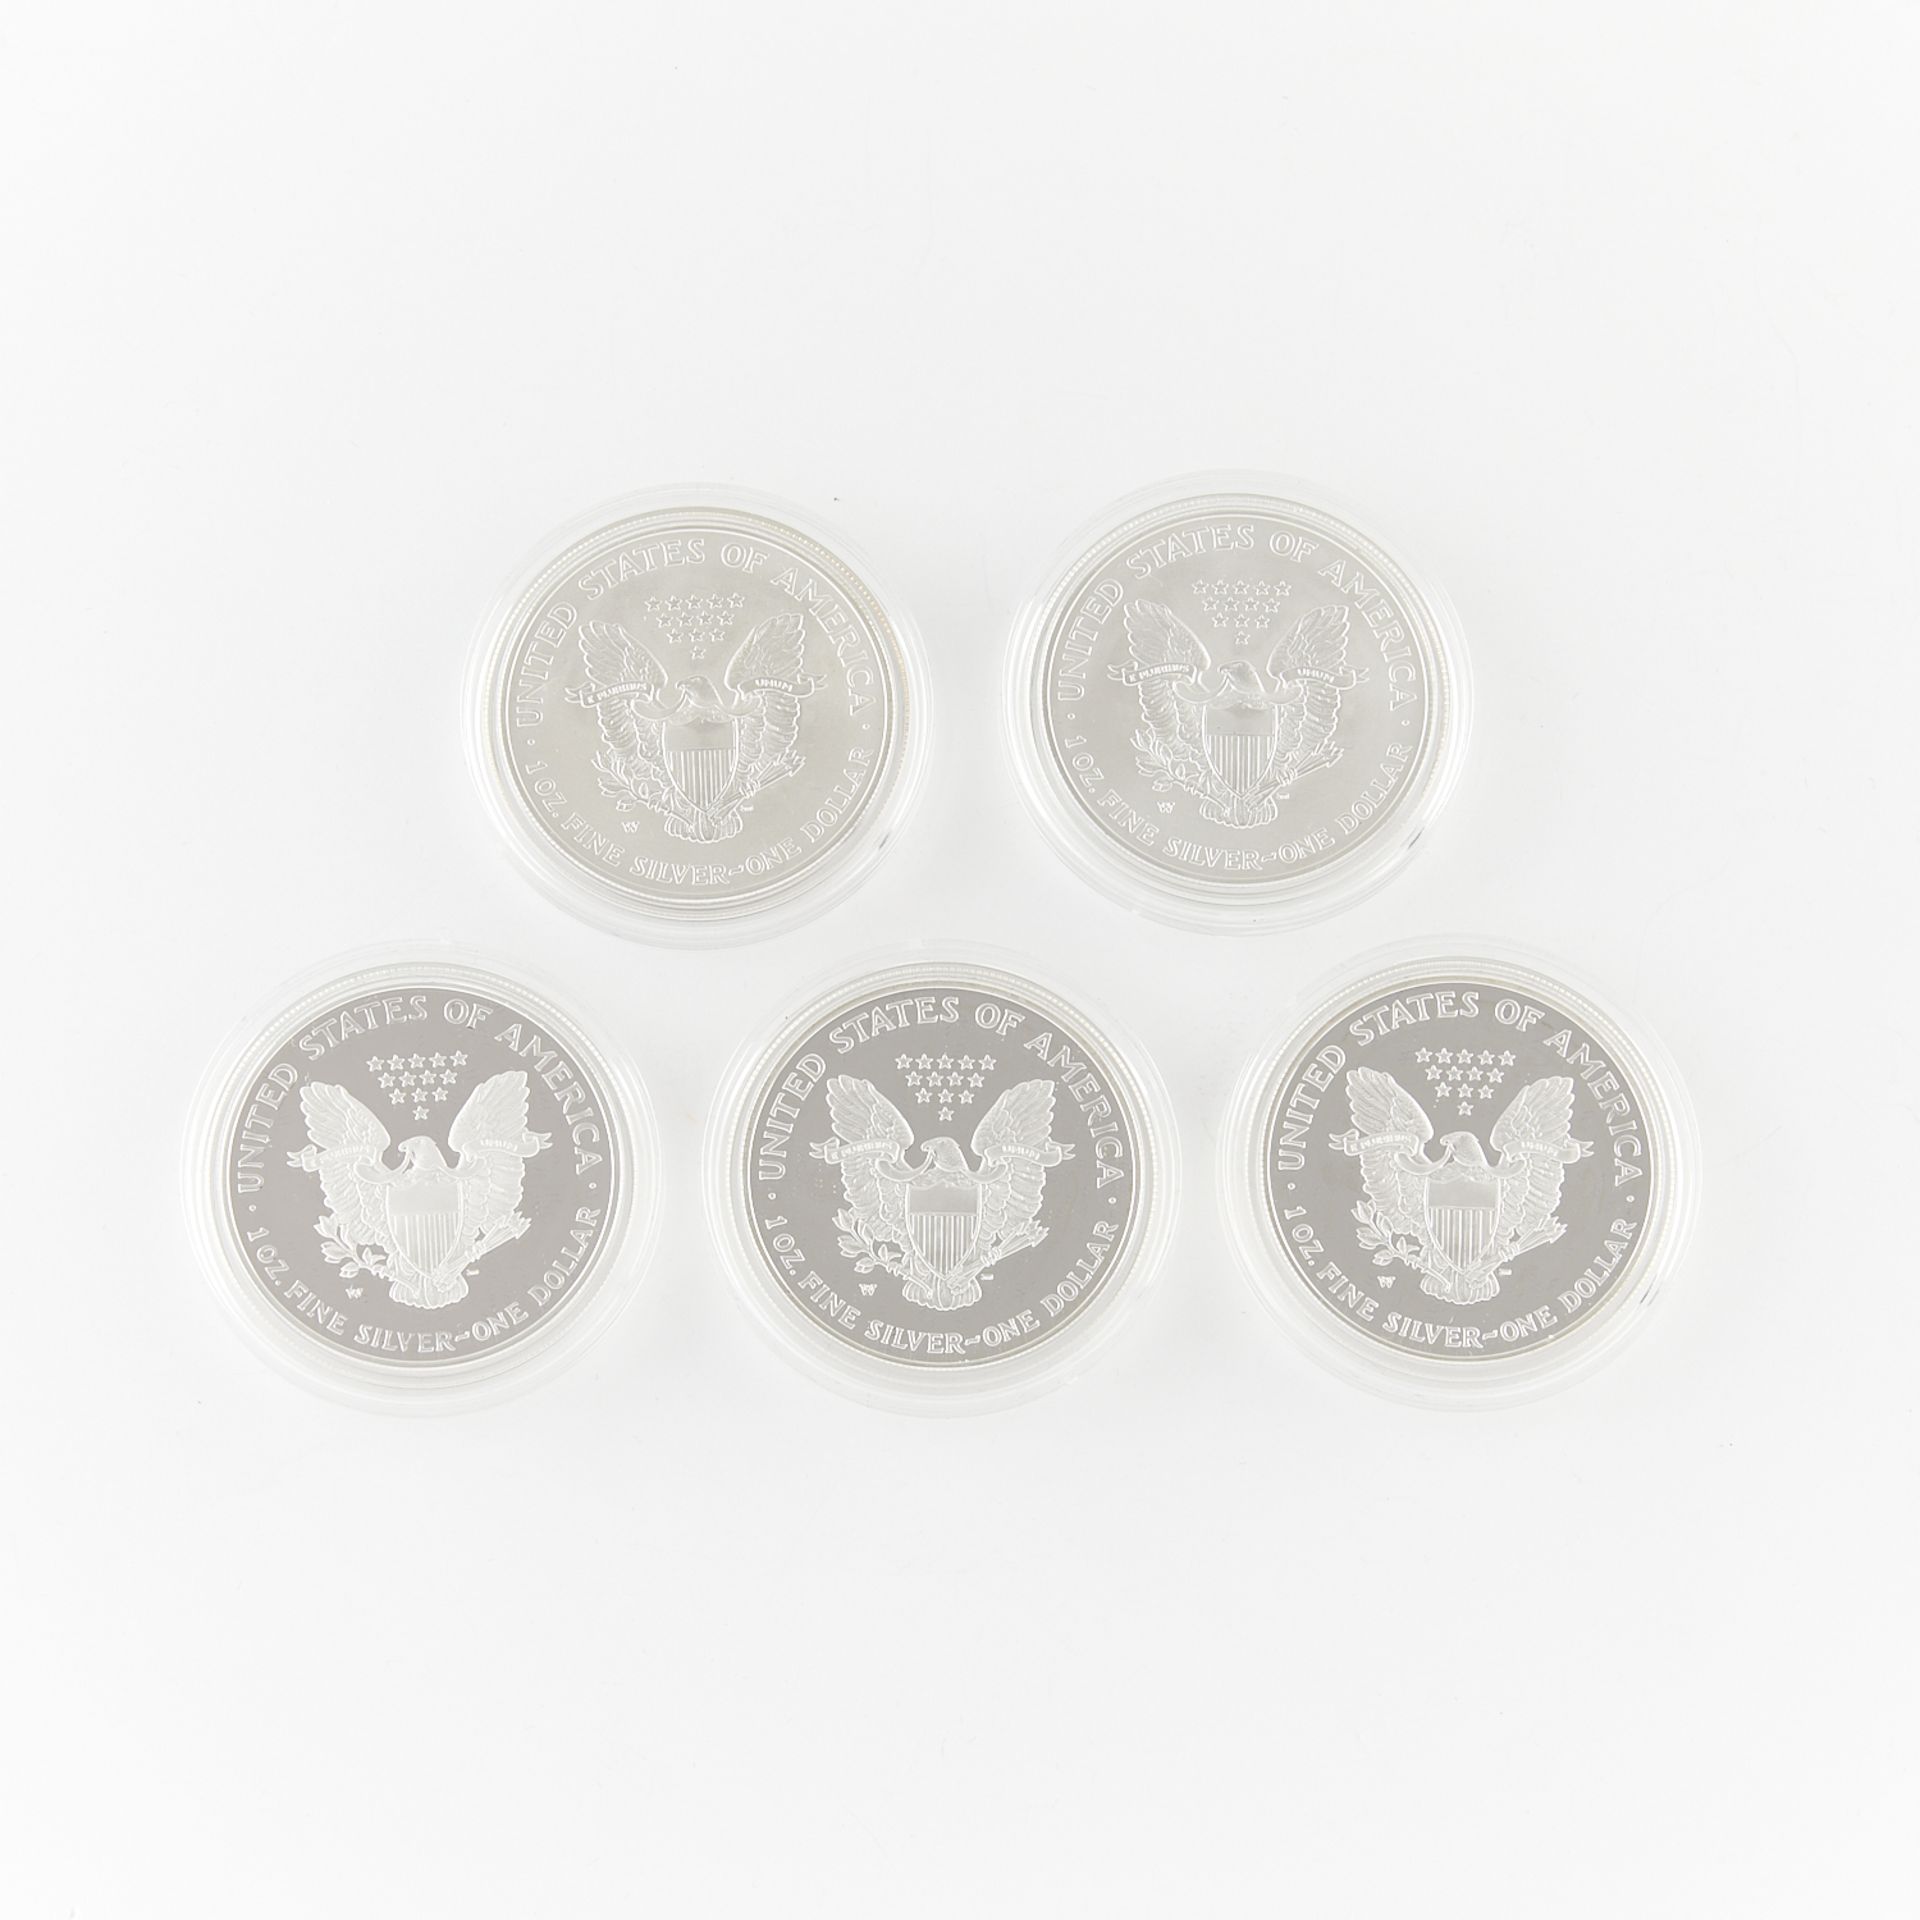 5 $1 American Eagle Silver Proof Coins - Image 2 of 3